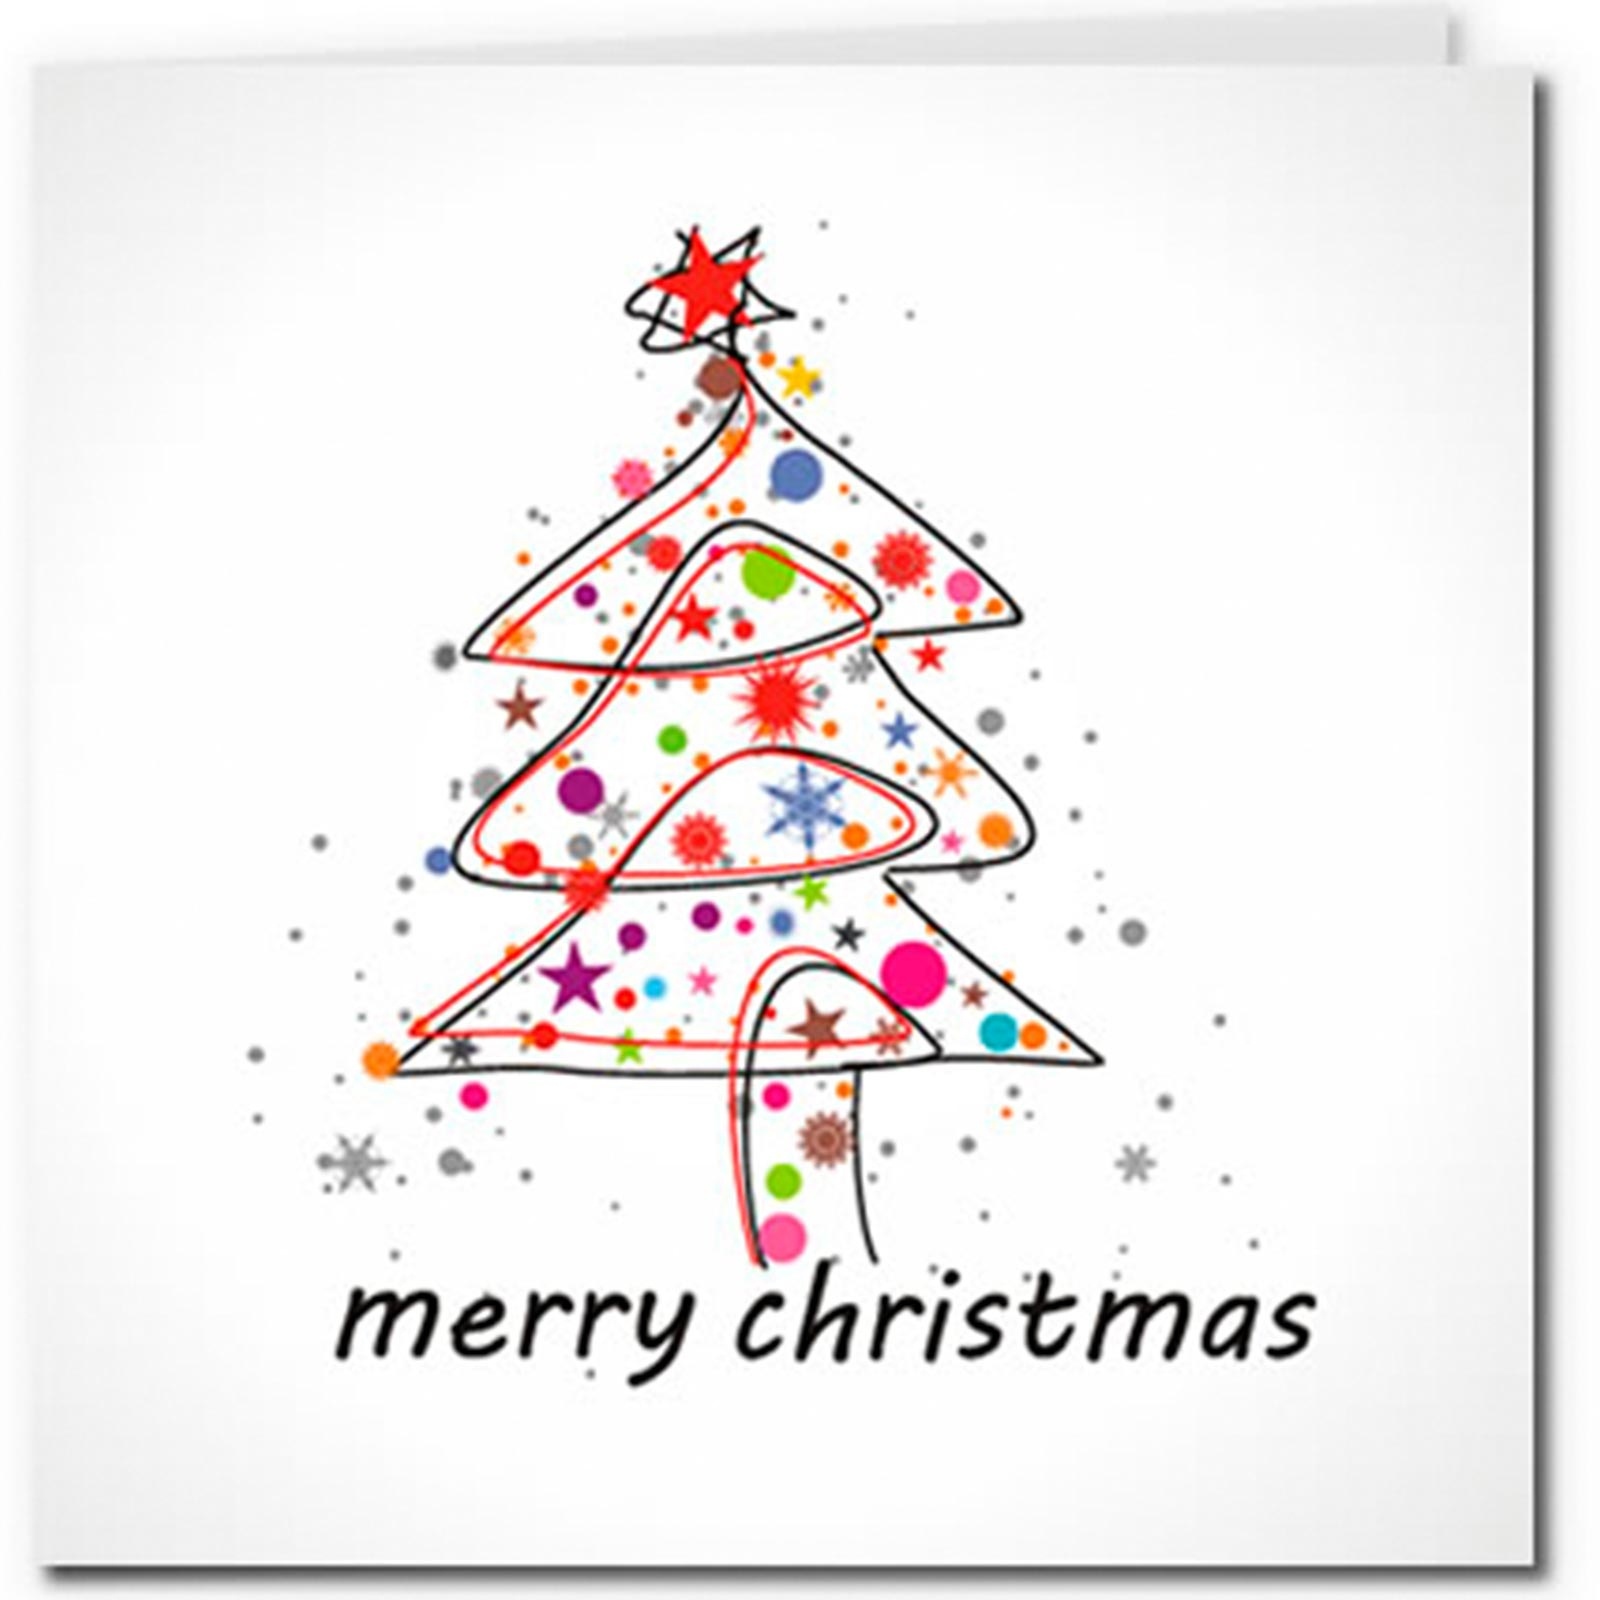 Free Christmas Cards To Print Out And Send This Year | Reader's Digest - Free Printable Xmas Cards